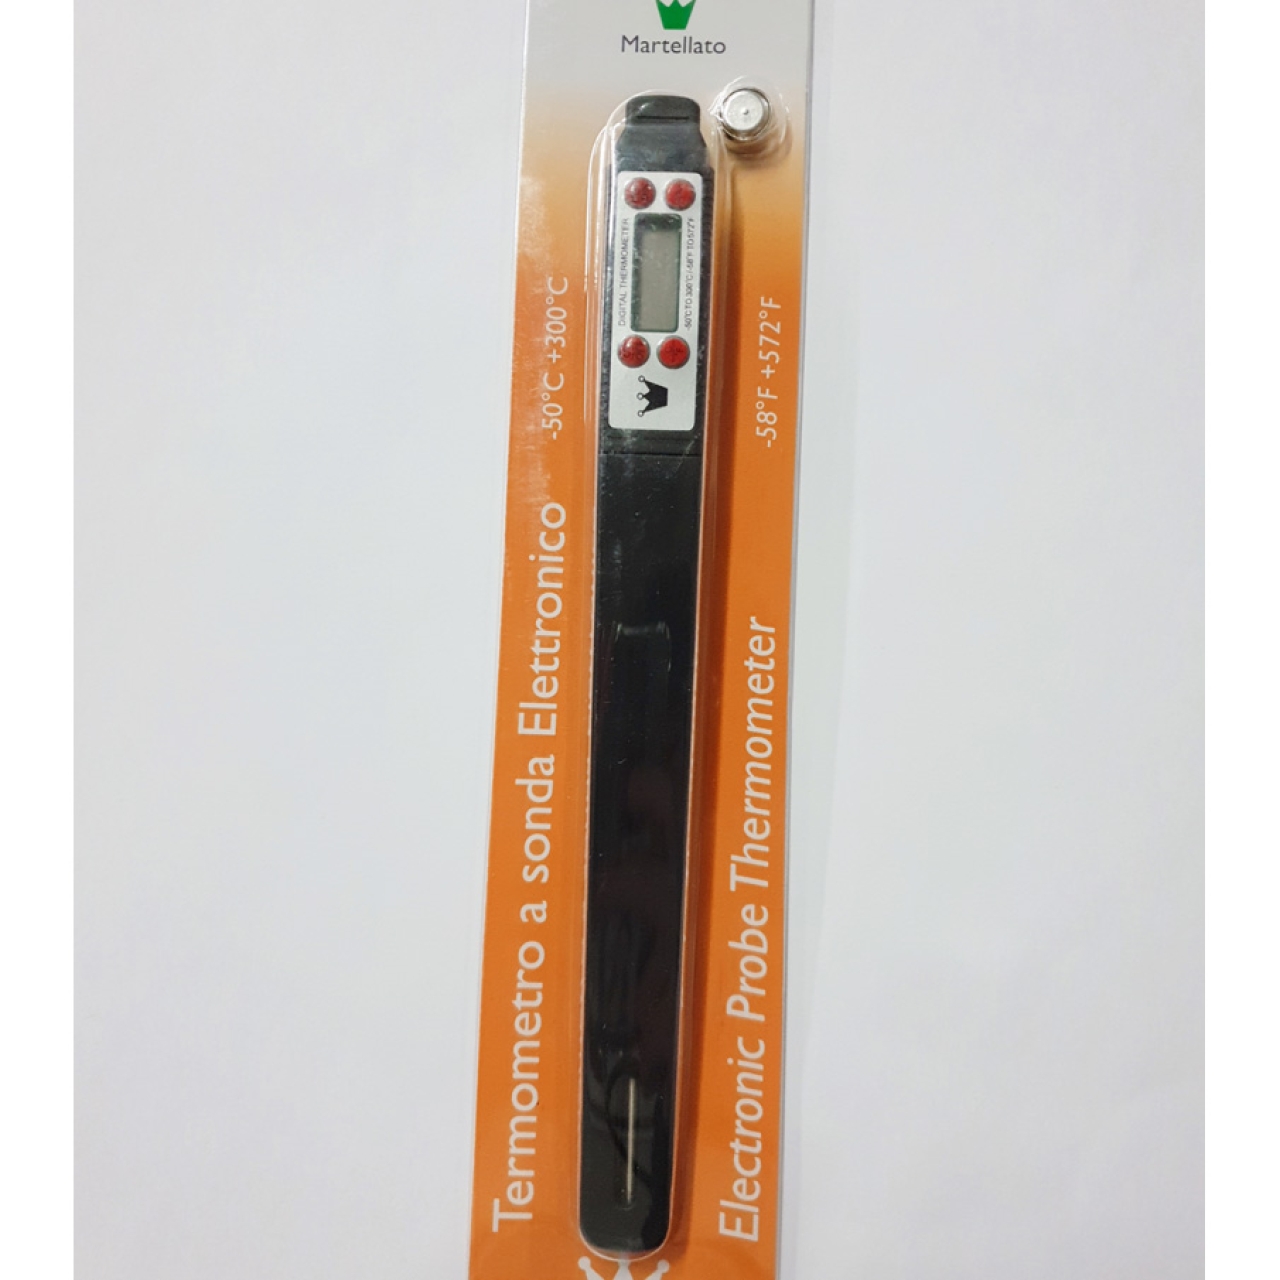 Digital Thermometer Patisserie